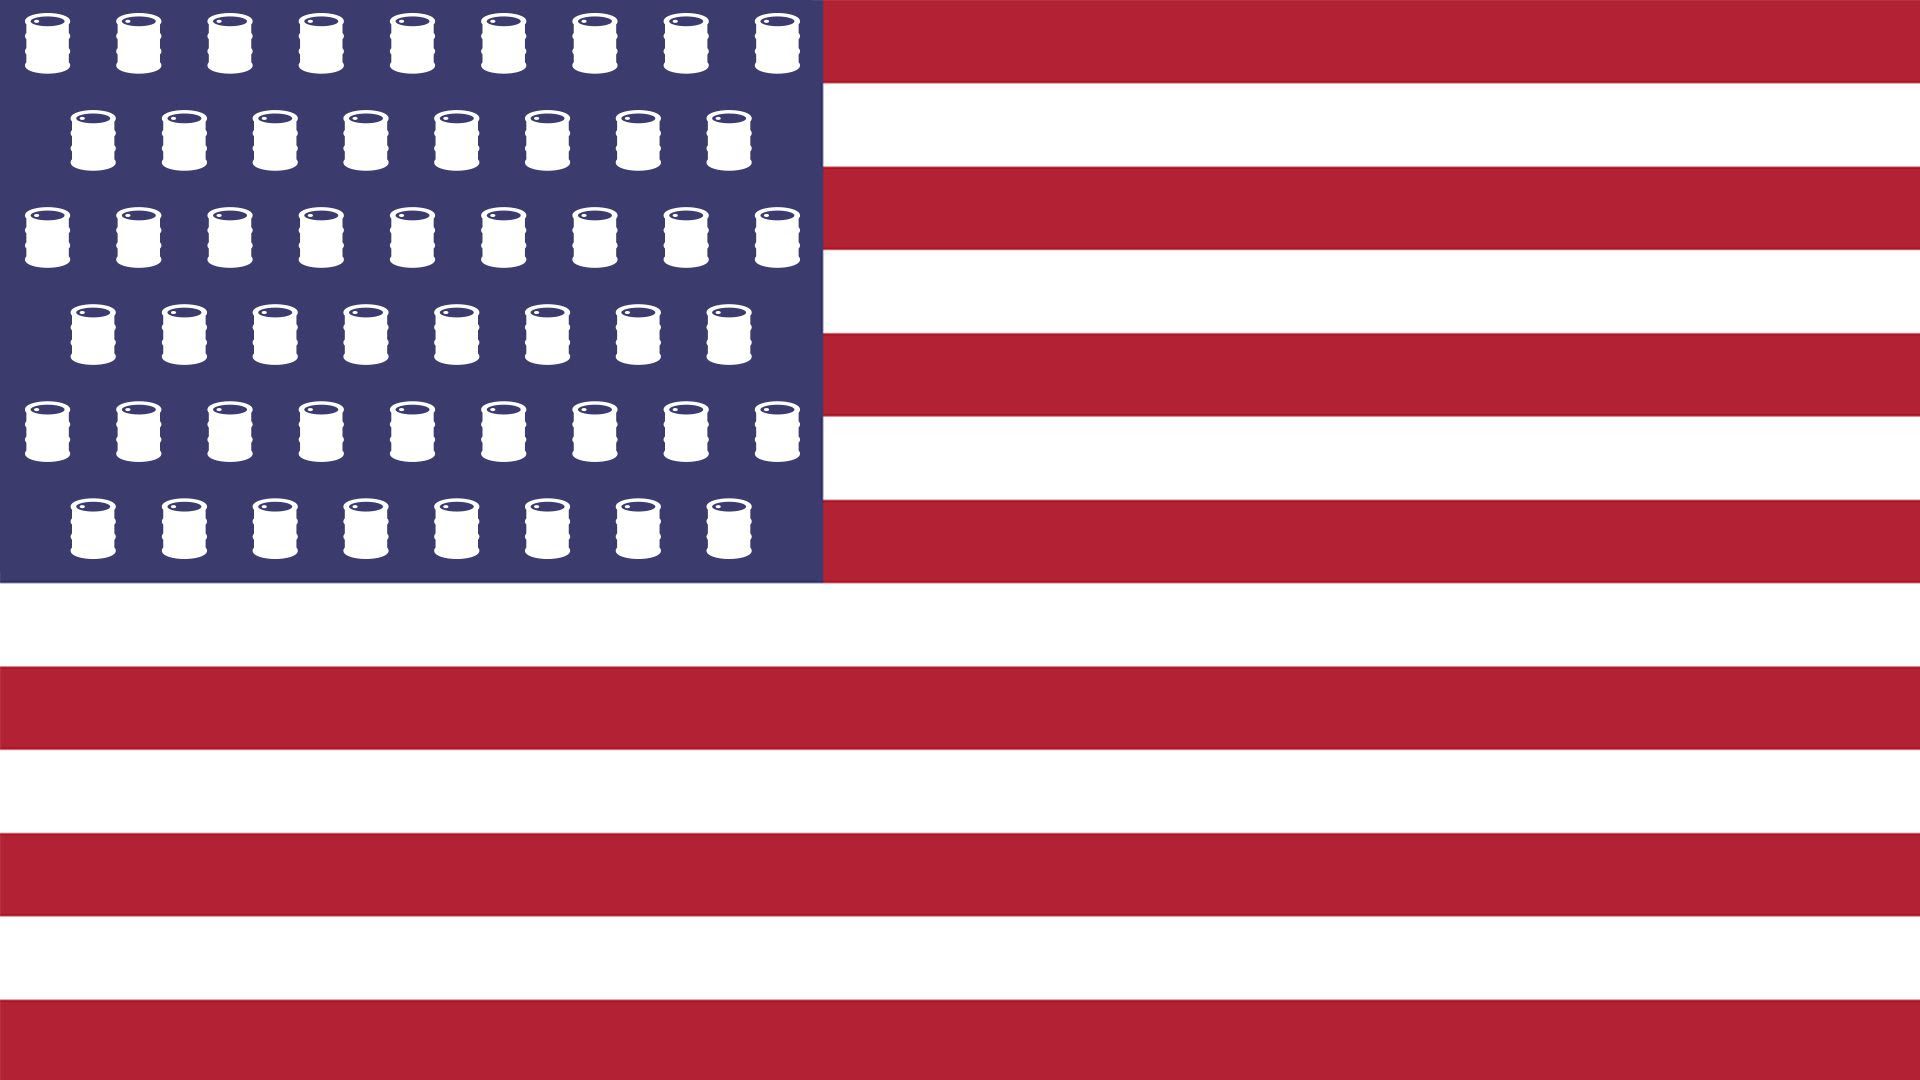 Illustration of American flag with coffee mugs replacing the stars